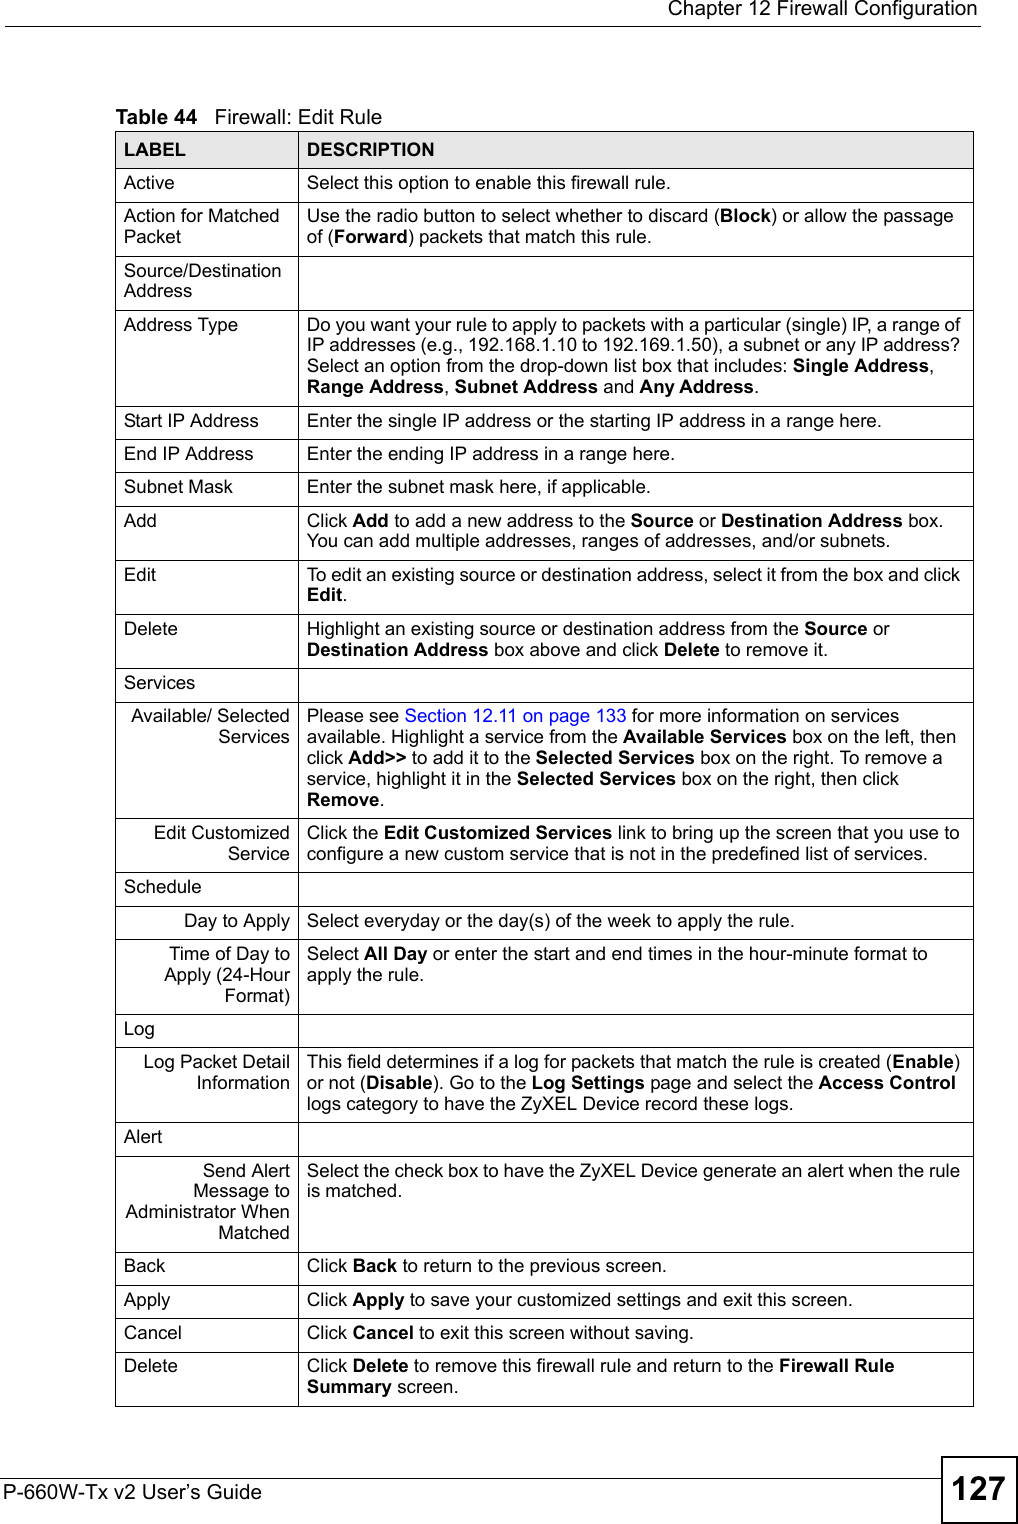  Chapter 12 Firewall ConfigurationP-660W-Tx v2 User’s Guide 127Table 44   Firewall: Edit RuleLABEL DESCRIPTIONActive Select this option to enable this firewall rule. Action for Matched PacketUse the radio button to select whether to discard (Block) or allow the passage of (Forward) packets that match this rule.Source/Destination AddressAddress Type Do you want your rule to apply to packets with a particular (single) IP, a range of IP addresses (e.g., 192.168.1.10 to 192.169.1.50), a subnet or any IP address? Select an option from the drop-down list box that includes: Single Address, Range Address, Subnet Address and Any Address. Start IP Address Enter the single IP address or the starting IP address in a range here. End IP Address Enter the ending IP address in a range here.Subnet Mask Enter the subnet mask here, if applicable.Add Click Add to add a new address to the Source or Destination Address box. You can add multiple addresses, ranges of addresses, and/or subnets.Edit To edit an existing source or destination address, select it from the box and click Edit.Delete Highlight an existing source or destination address from the Source or Destination Address box above and click Delete to remove it.ServicesAvailable/ SelectedServicesPlease see Section 12.11 on page 133 for more information on services available. Highlight a service from the Available Services box on the left, then click Add&gt;&gt; to add it to the Selected Services box on the right. To remove a service, highlight it in the Selected Services box on the right, then click Remove.Edit CustomizedServiceClick the Edit Customized Services link to bring up the screen that you use to configure a new custom service that is not in the predefined list of services.ScheduleDay to Apply Select everyday or the day(s) of the week to apply the rule.Time of Day toApply (24-HourFormat)Select All Day or enter the start and end times in the hour-minute format to apply the rule.LogLog Packet DetailInformationThis field determines if a log for packets that match the rule is created (Enable) or not (Disable). Go to the Log Settings page and select the Access Control logs category to have the ZyXEL Device record these logs.Alert Send AlertMessage toAdministrator WhenMatchedSelect the check box to have the ZyXEL Device generate an alert when the rule is matched.Back Click Back to return to the previous screen. Apply Click Apply to save your customized settings and exit this screen.Cancel Click Cancel to exit this screen without saving.Delete Click Delete to remove this firewall rule and return to the Firewall Rule Summary screen. 